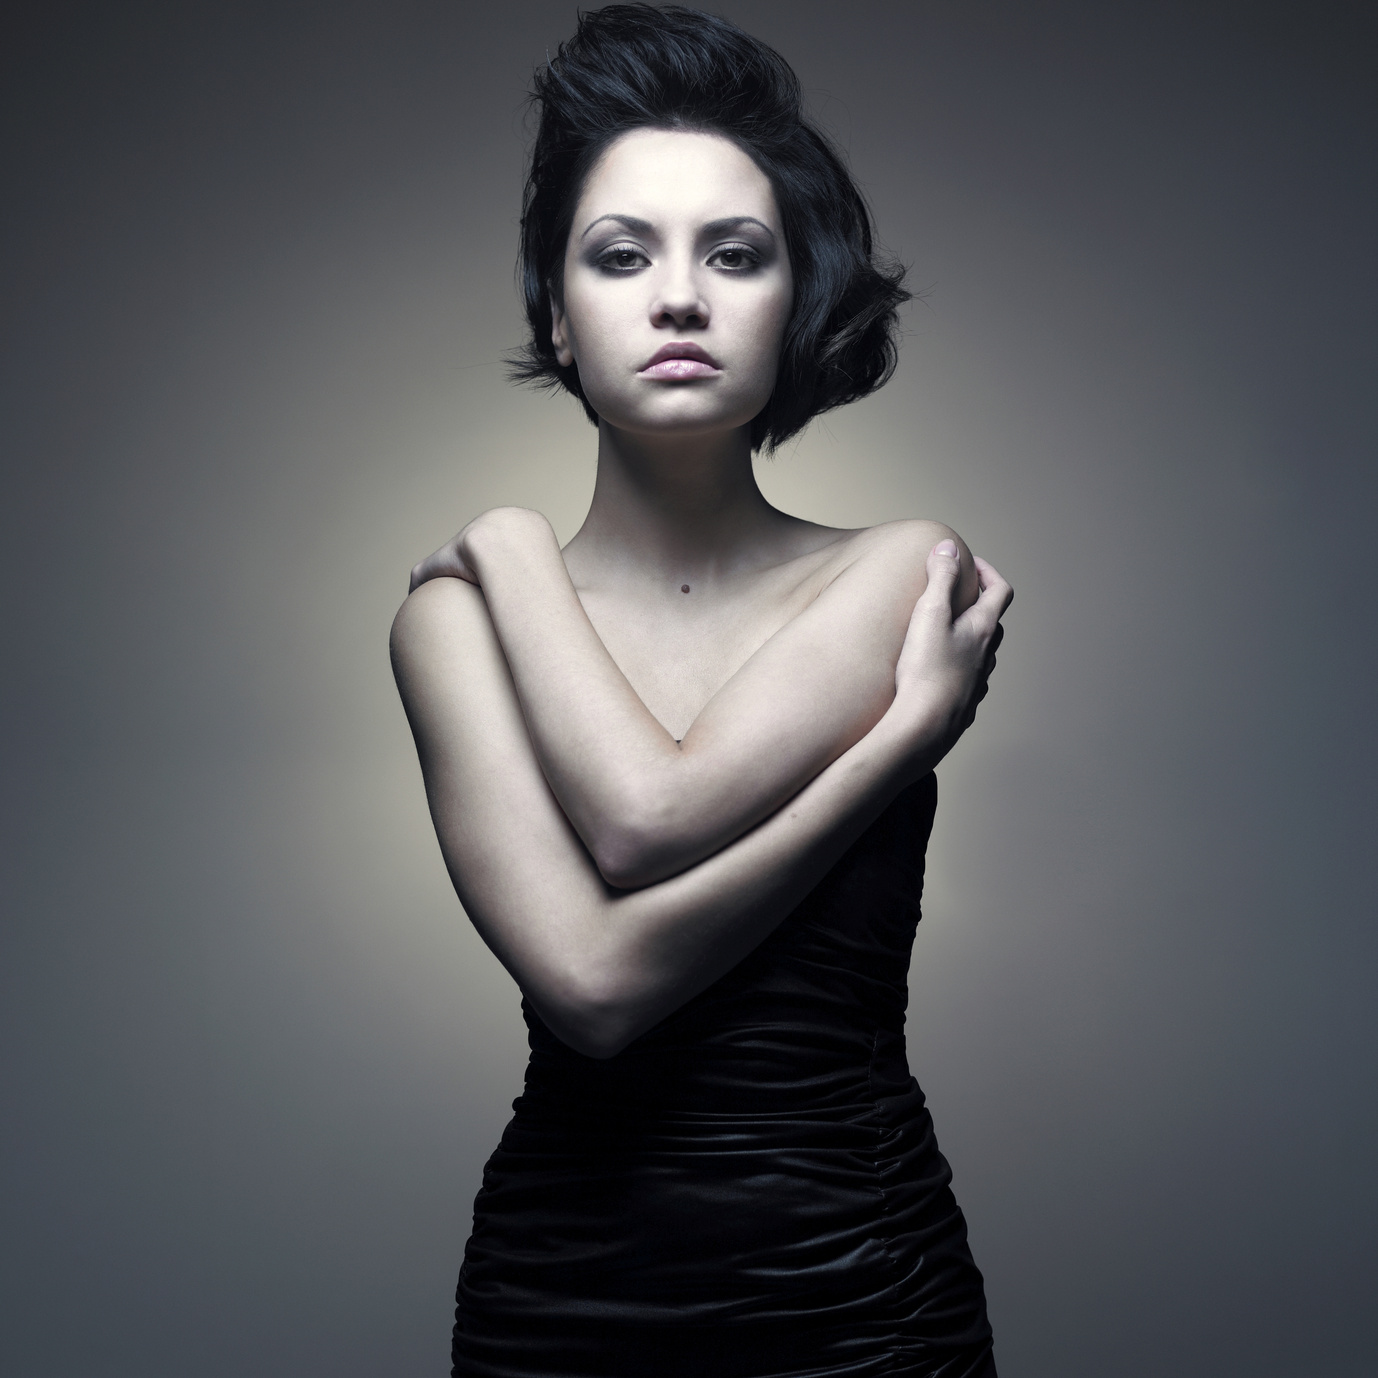 Fashion portrait of young magnificent lady in black dress